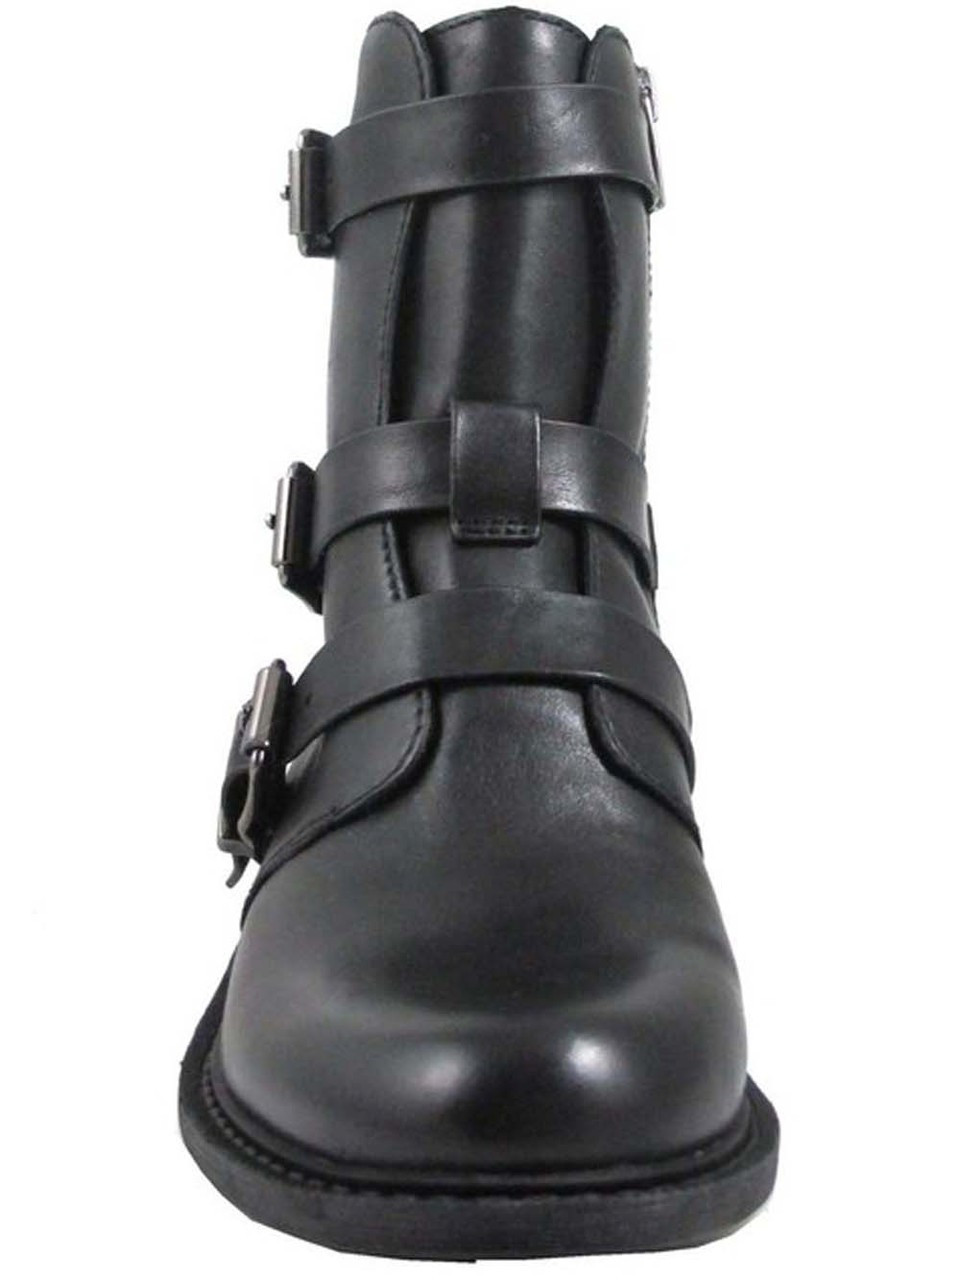 Vince Camuto Women's Raegel Motorcycle Boots